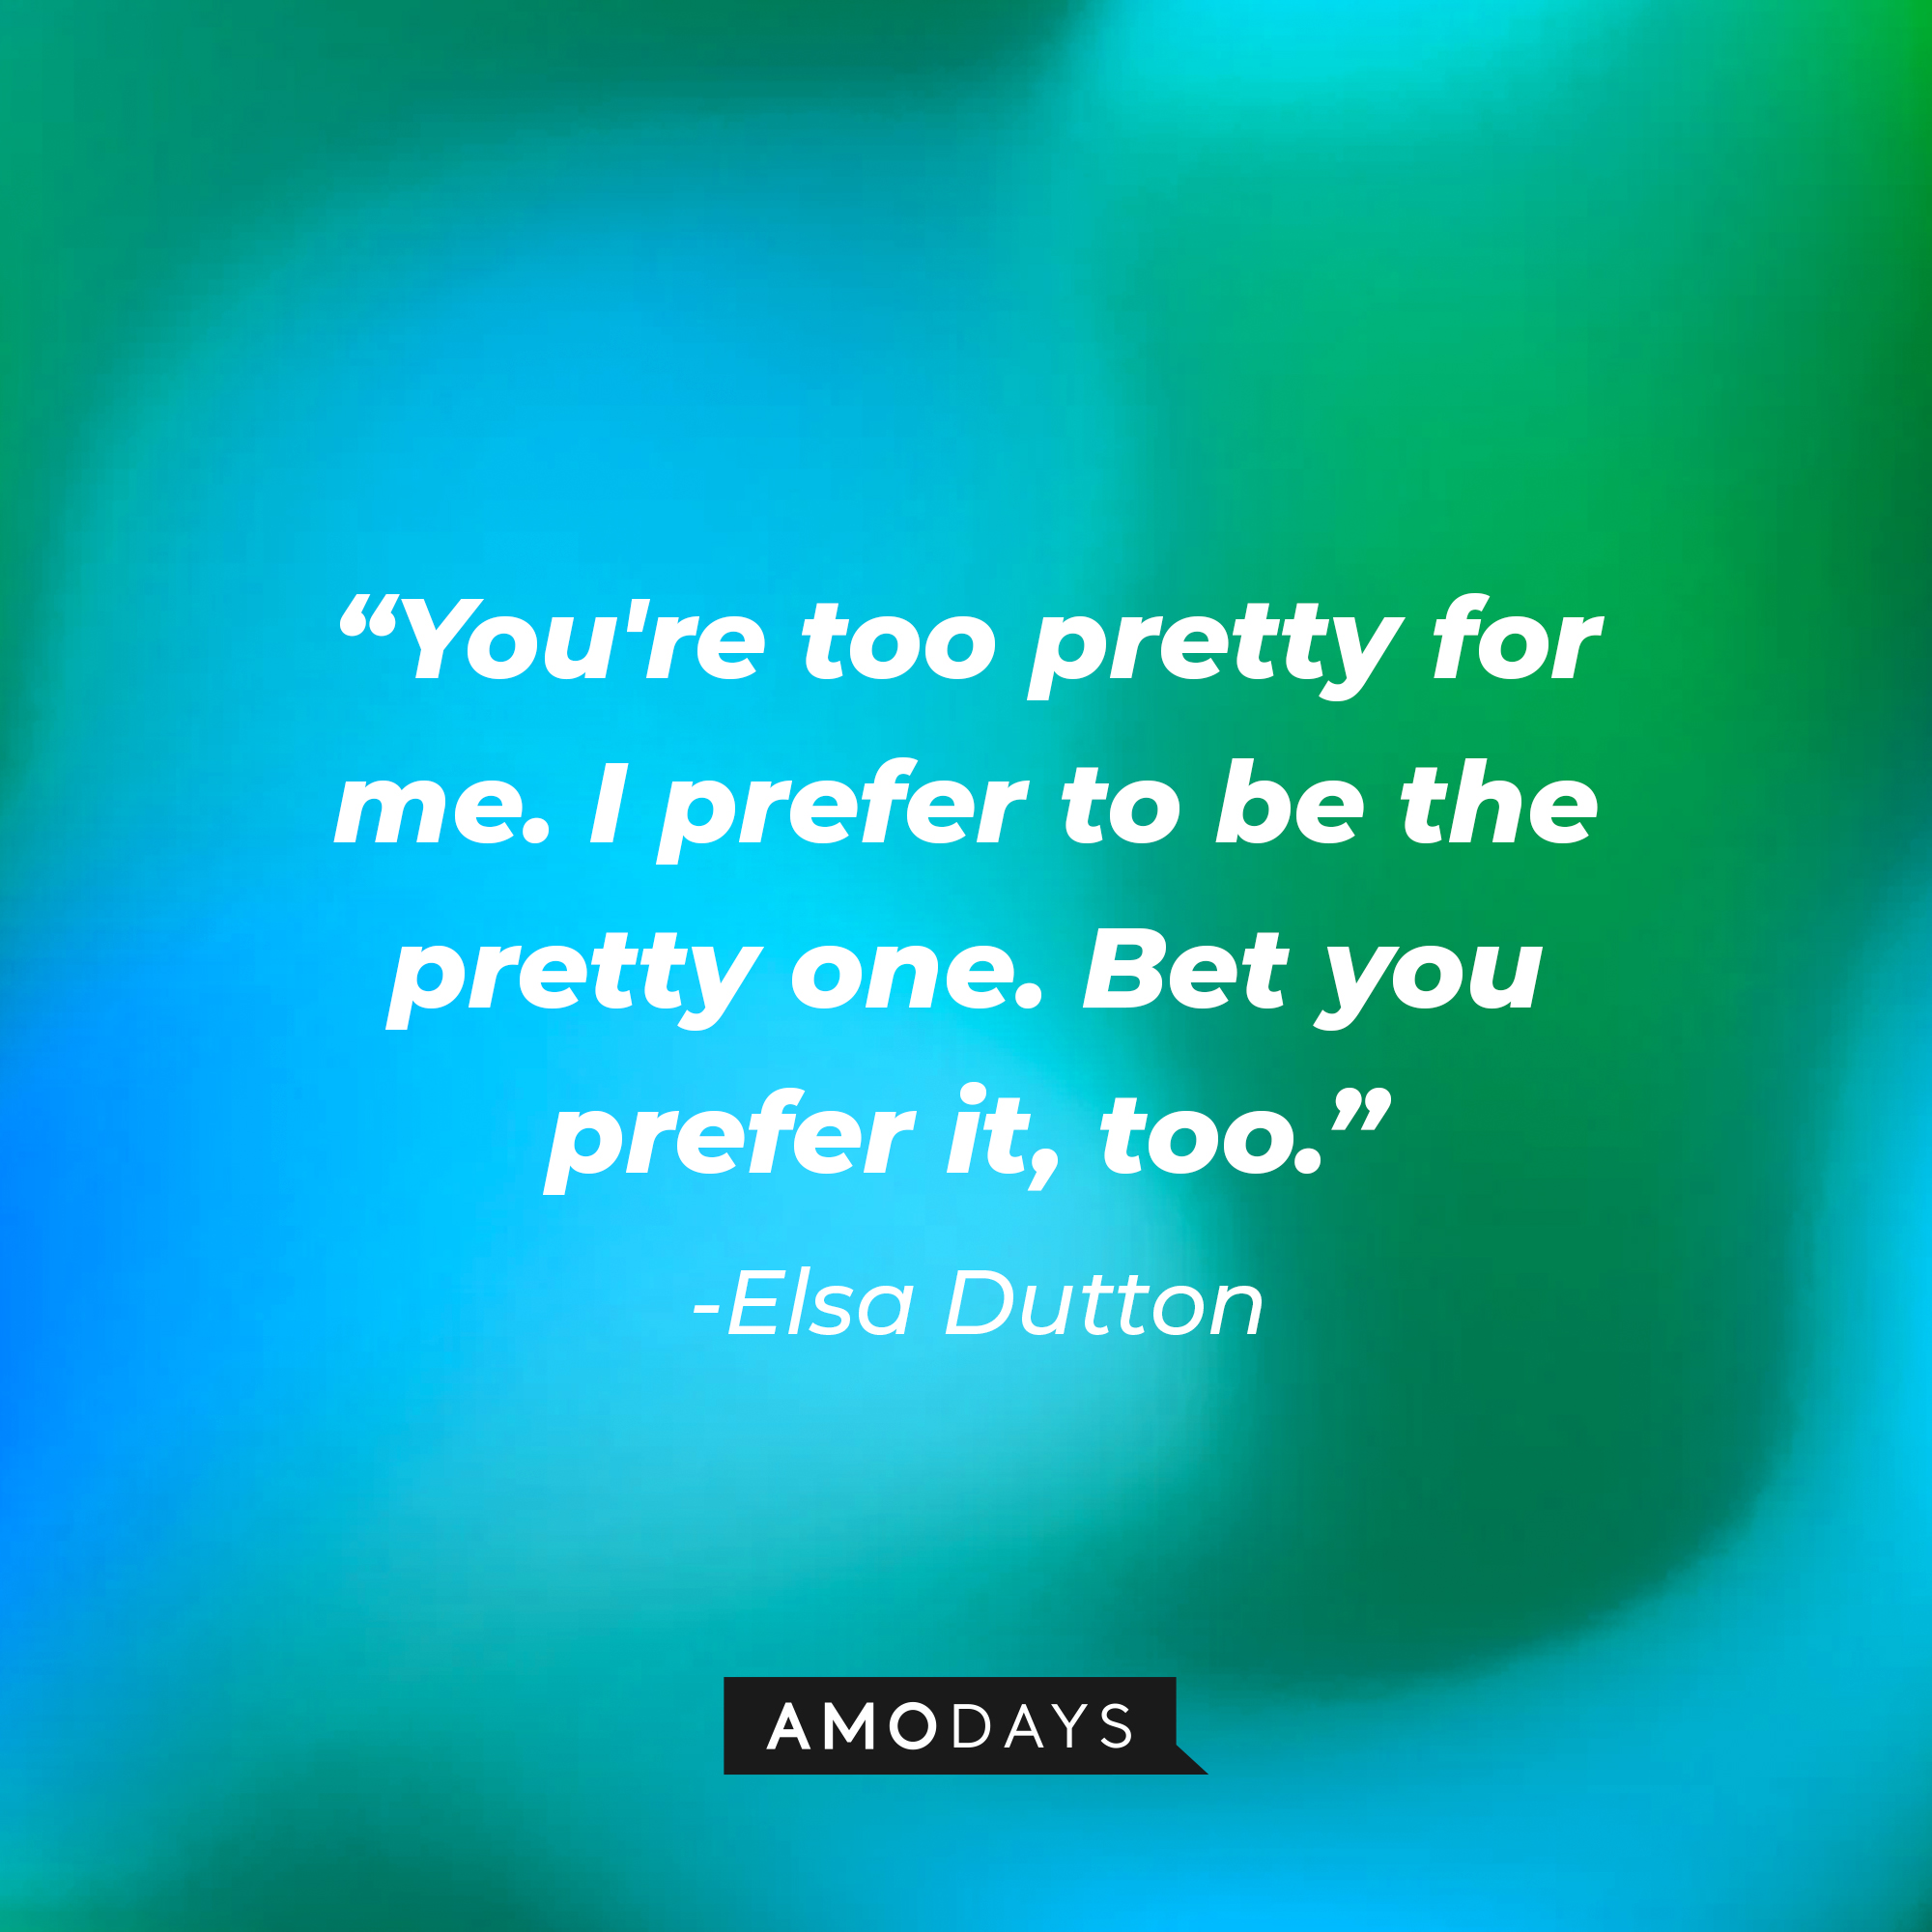 Elsa Dutton's quote: "You're too pretty for me. I prefer to be the pretty one. Bet you prefer it, too." | Source: AmoDays